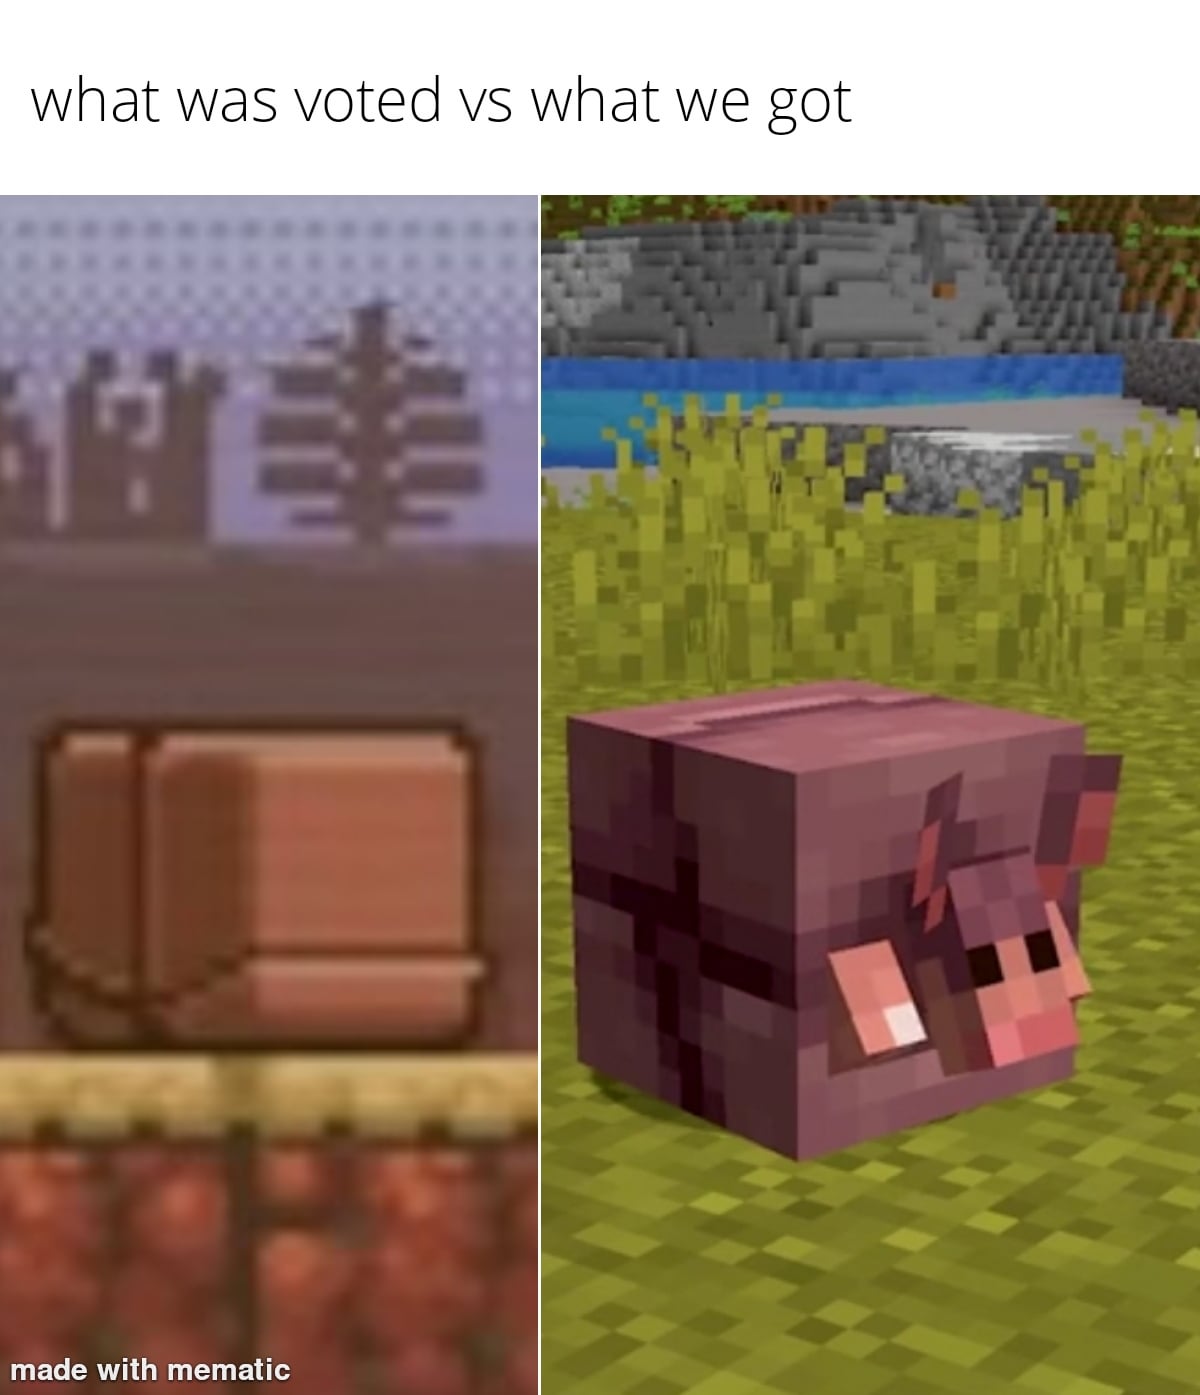 Minecraft Memes - "Not the crab I wanted, but okay"